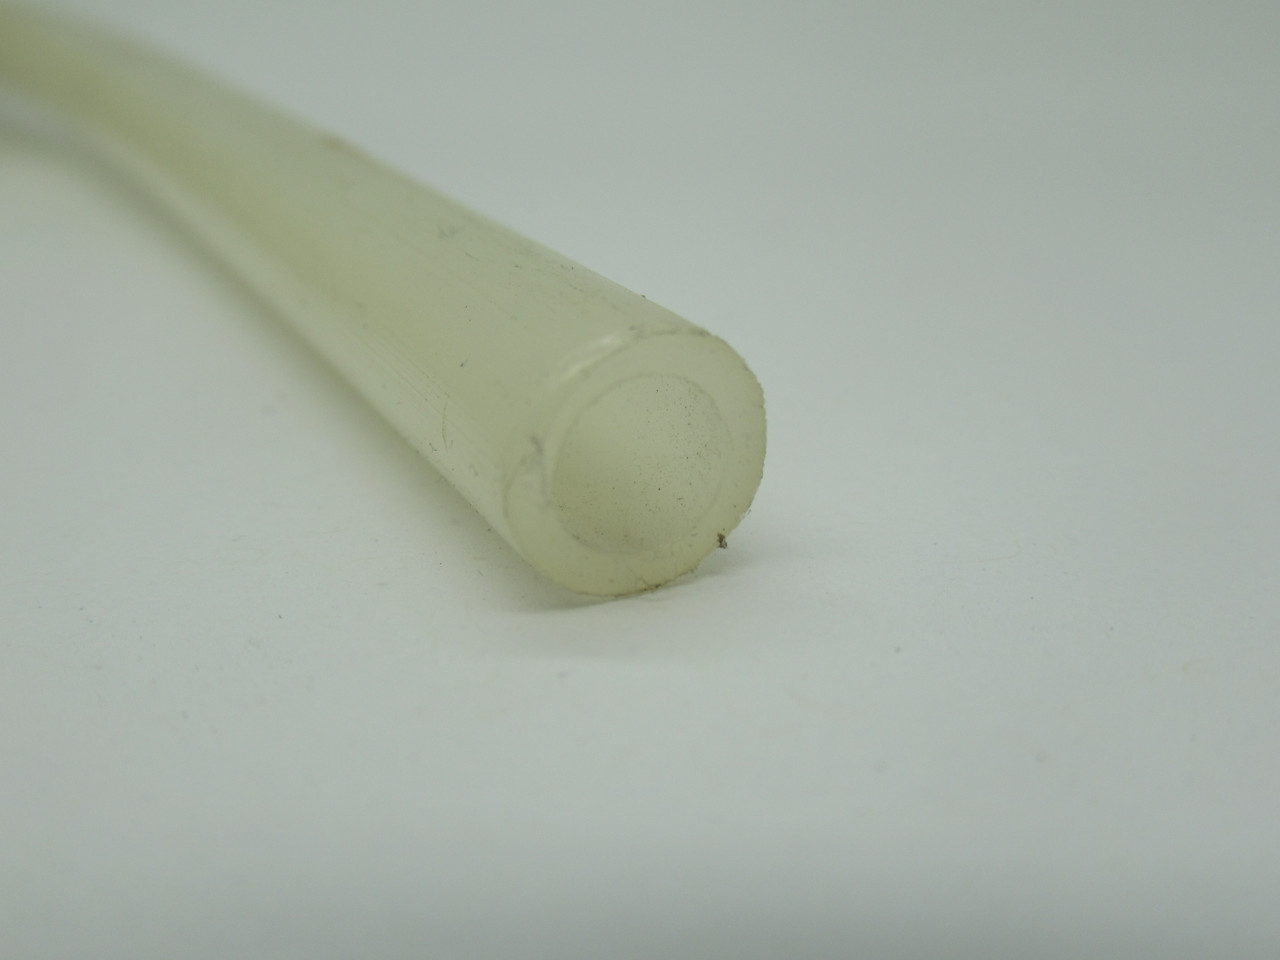 Fairview 360-6-100 LDPE Tubing 3/8"OD 1/4"ID 100psi 34-1/2ft Length Min. NOP